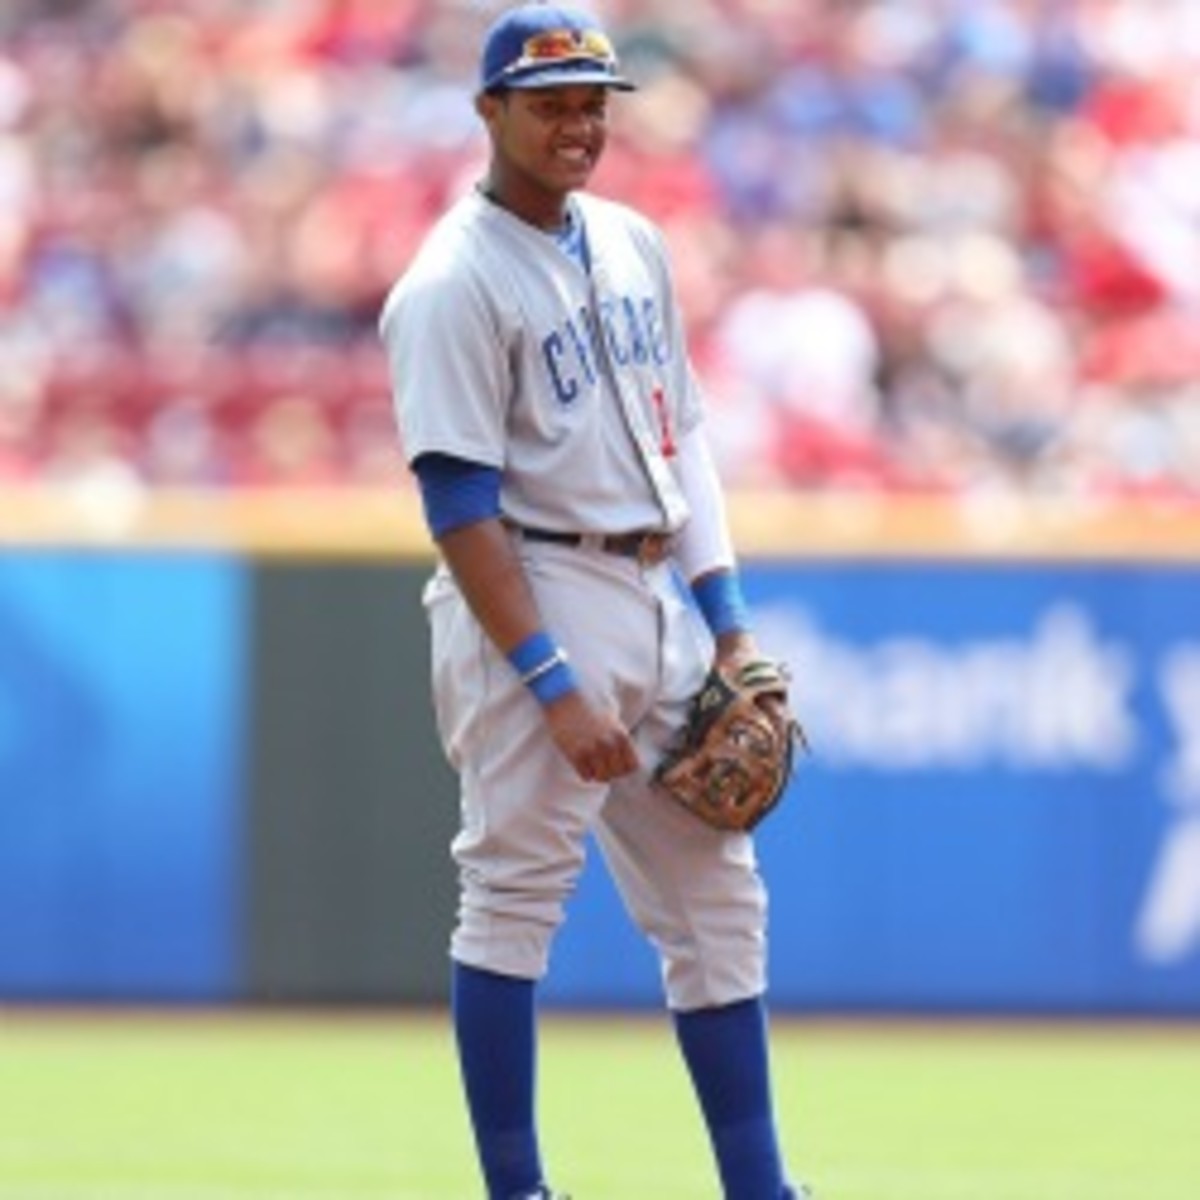 Cubs shortstop Starlin Castro has made two All-Star teams despite being just 22 years old. (Andy Lyons/Getty Images)